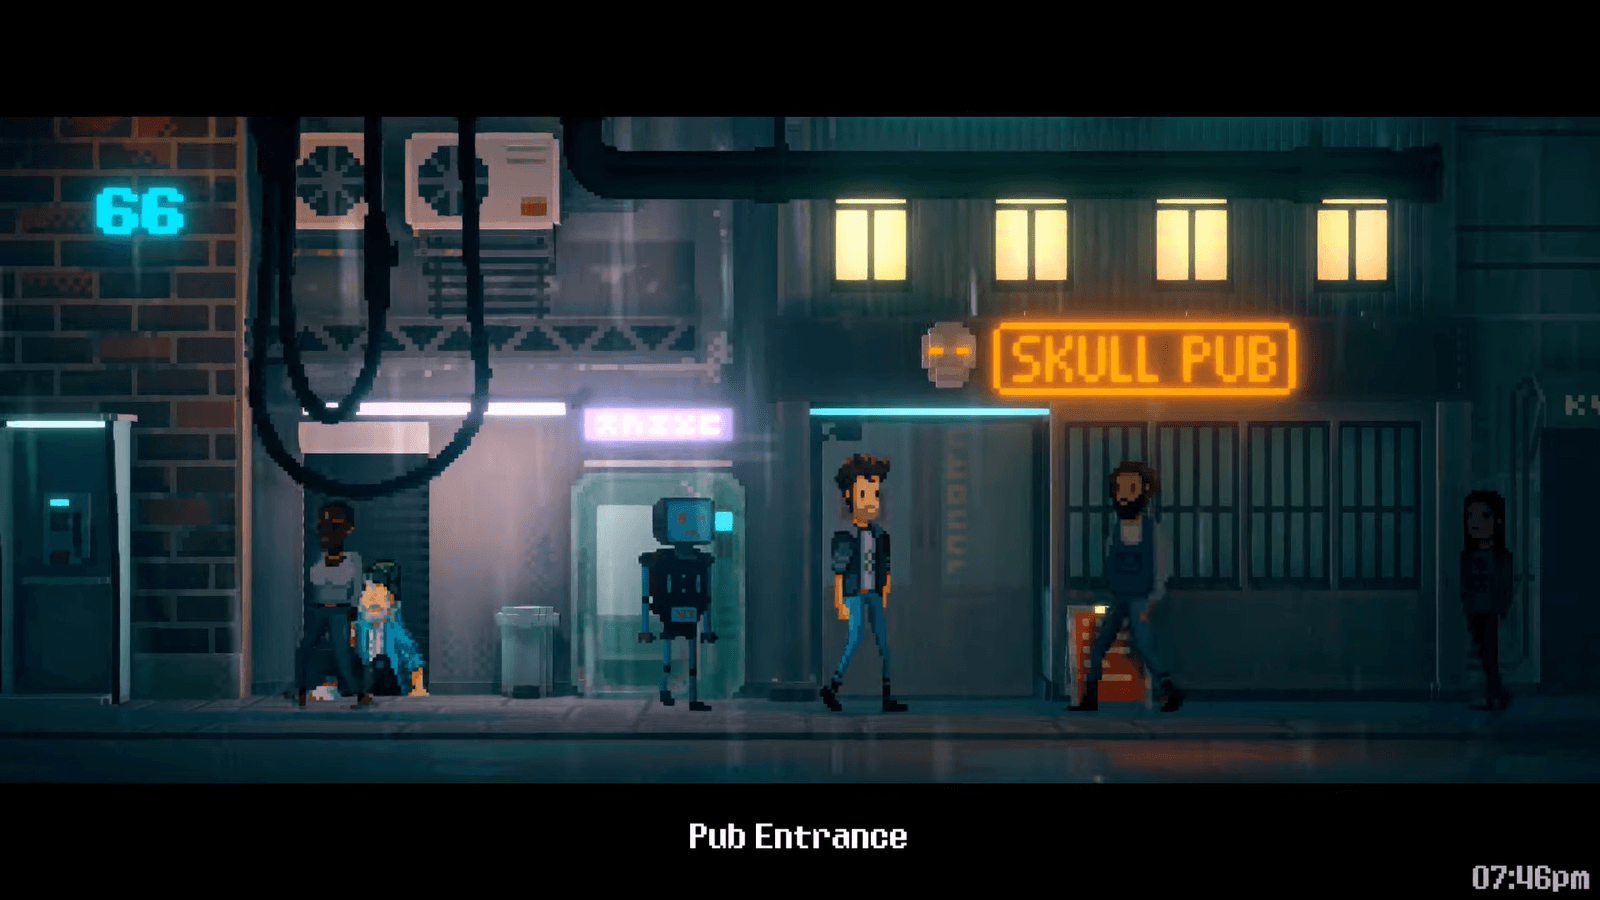 A futuristic street is featured predominently with an assortment of qurirky characters strewn across it